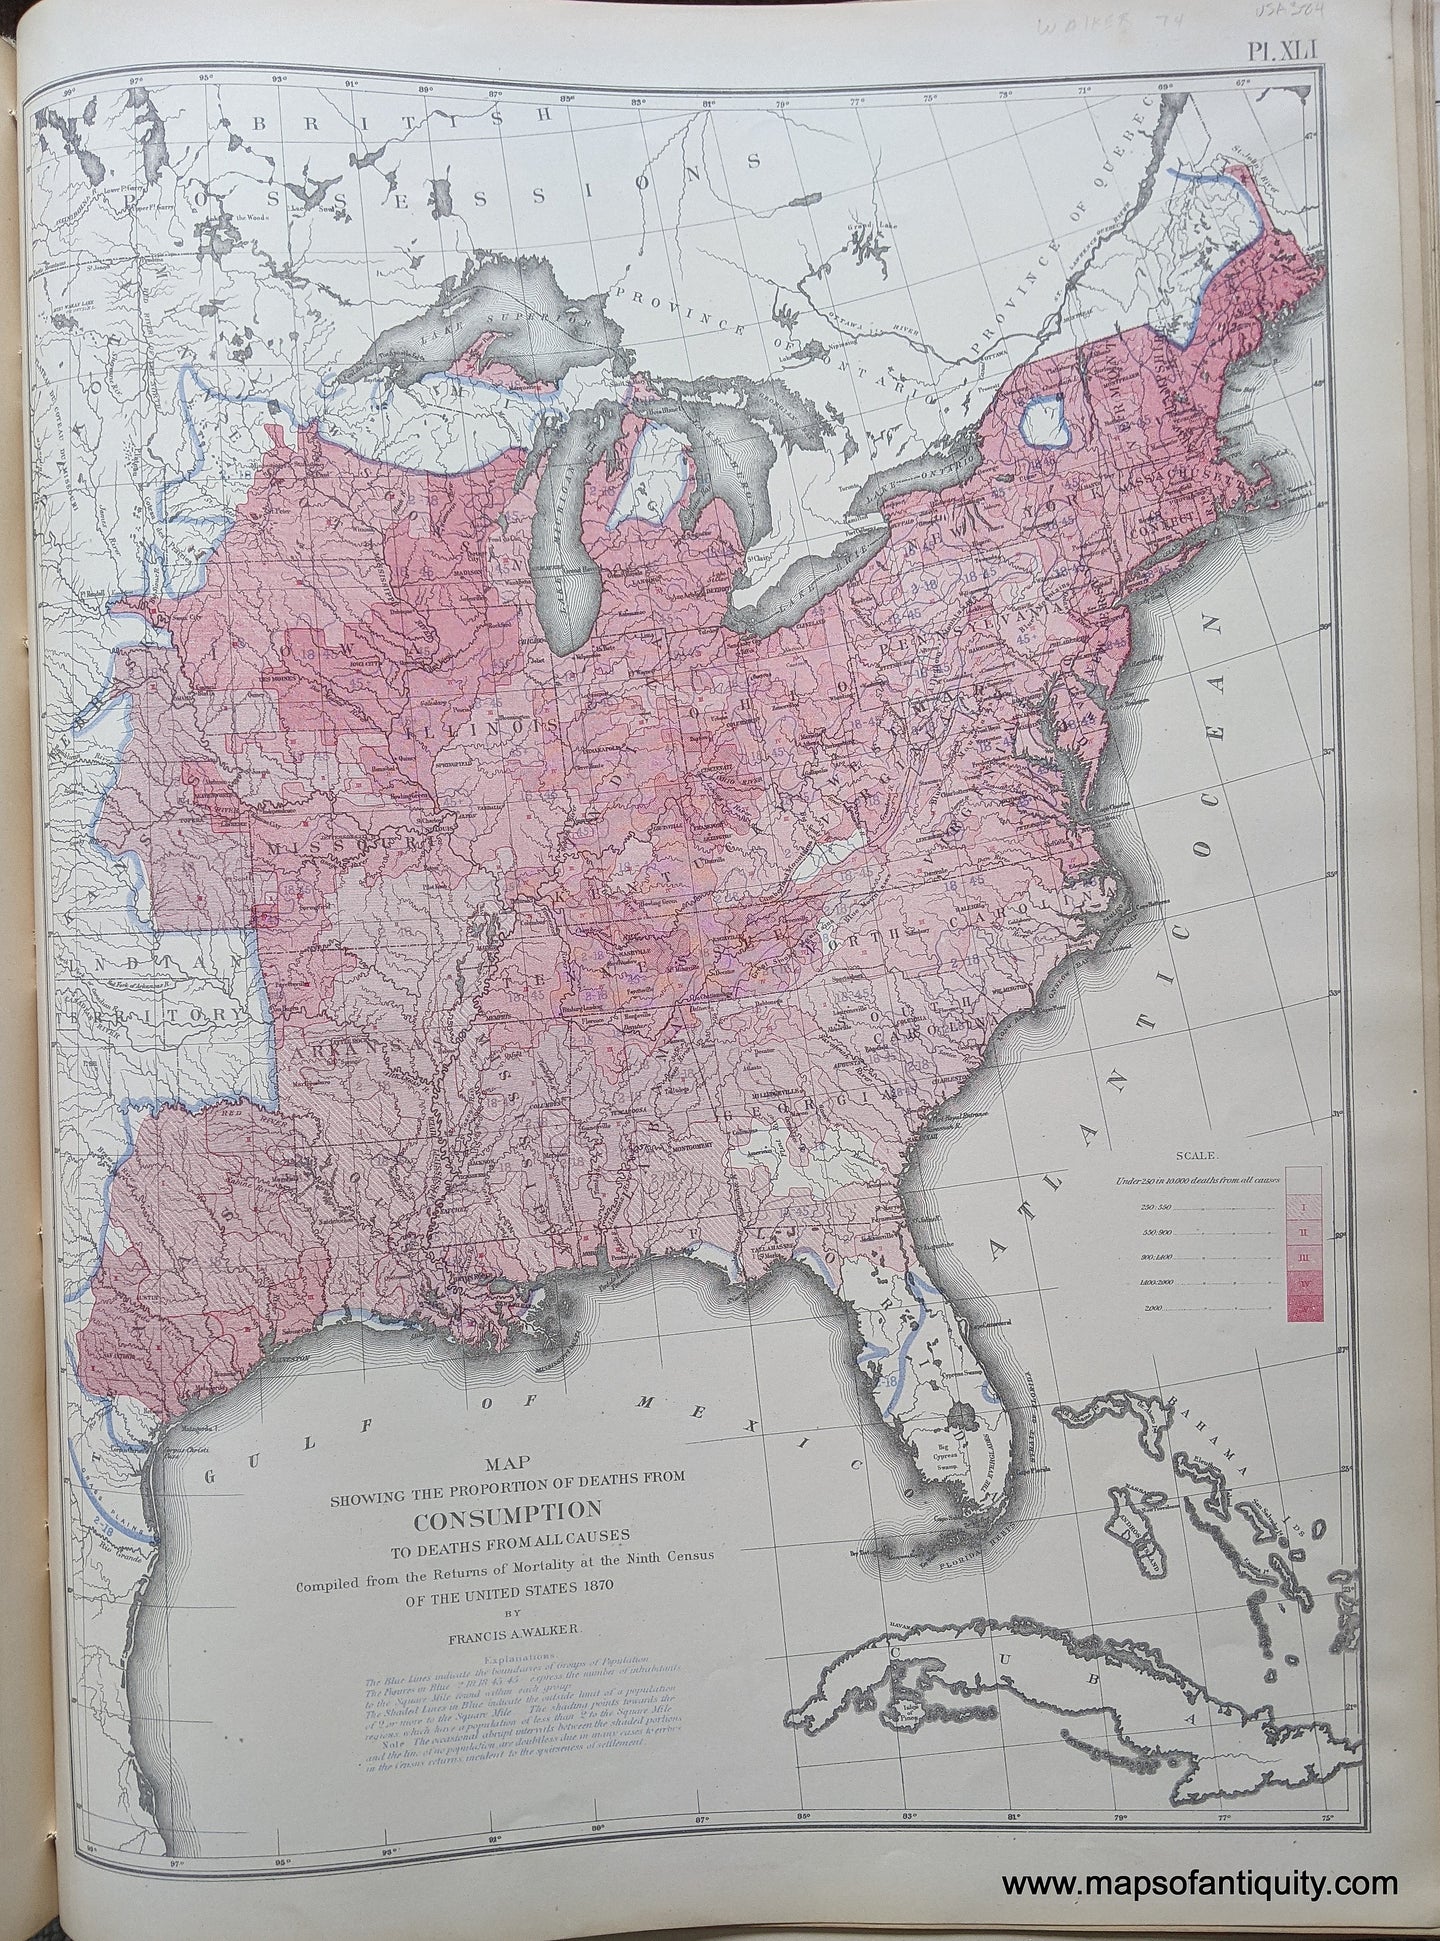 Genuine-Antique-Map-Map-Showing-the-Proportion-of-Deaths-from-Consumption-to-Deaths-from-All-Causes.-United-States--1874-Walker-/-Bien-Maps-Of-Antiquity-1800s-19th-century